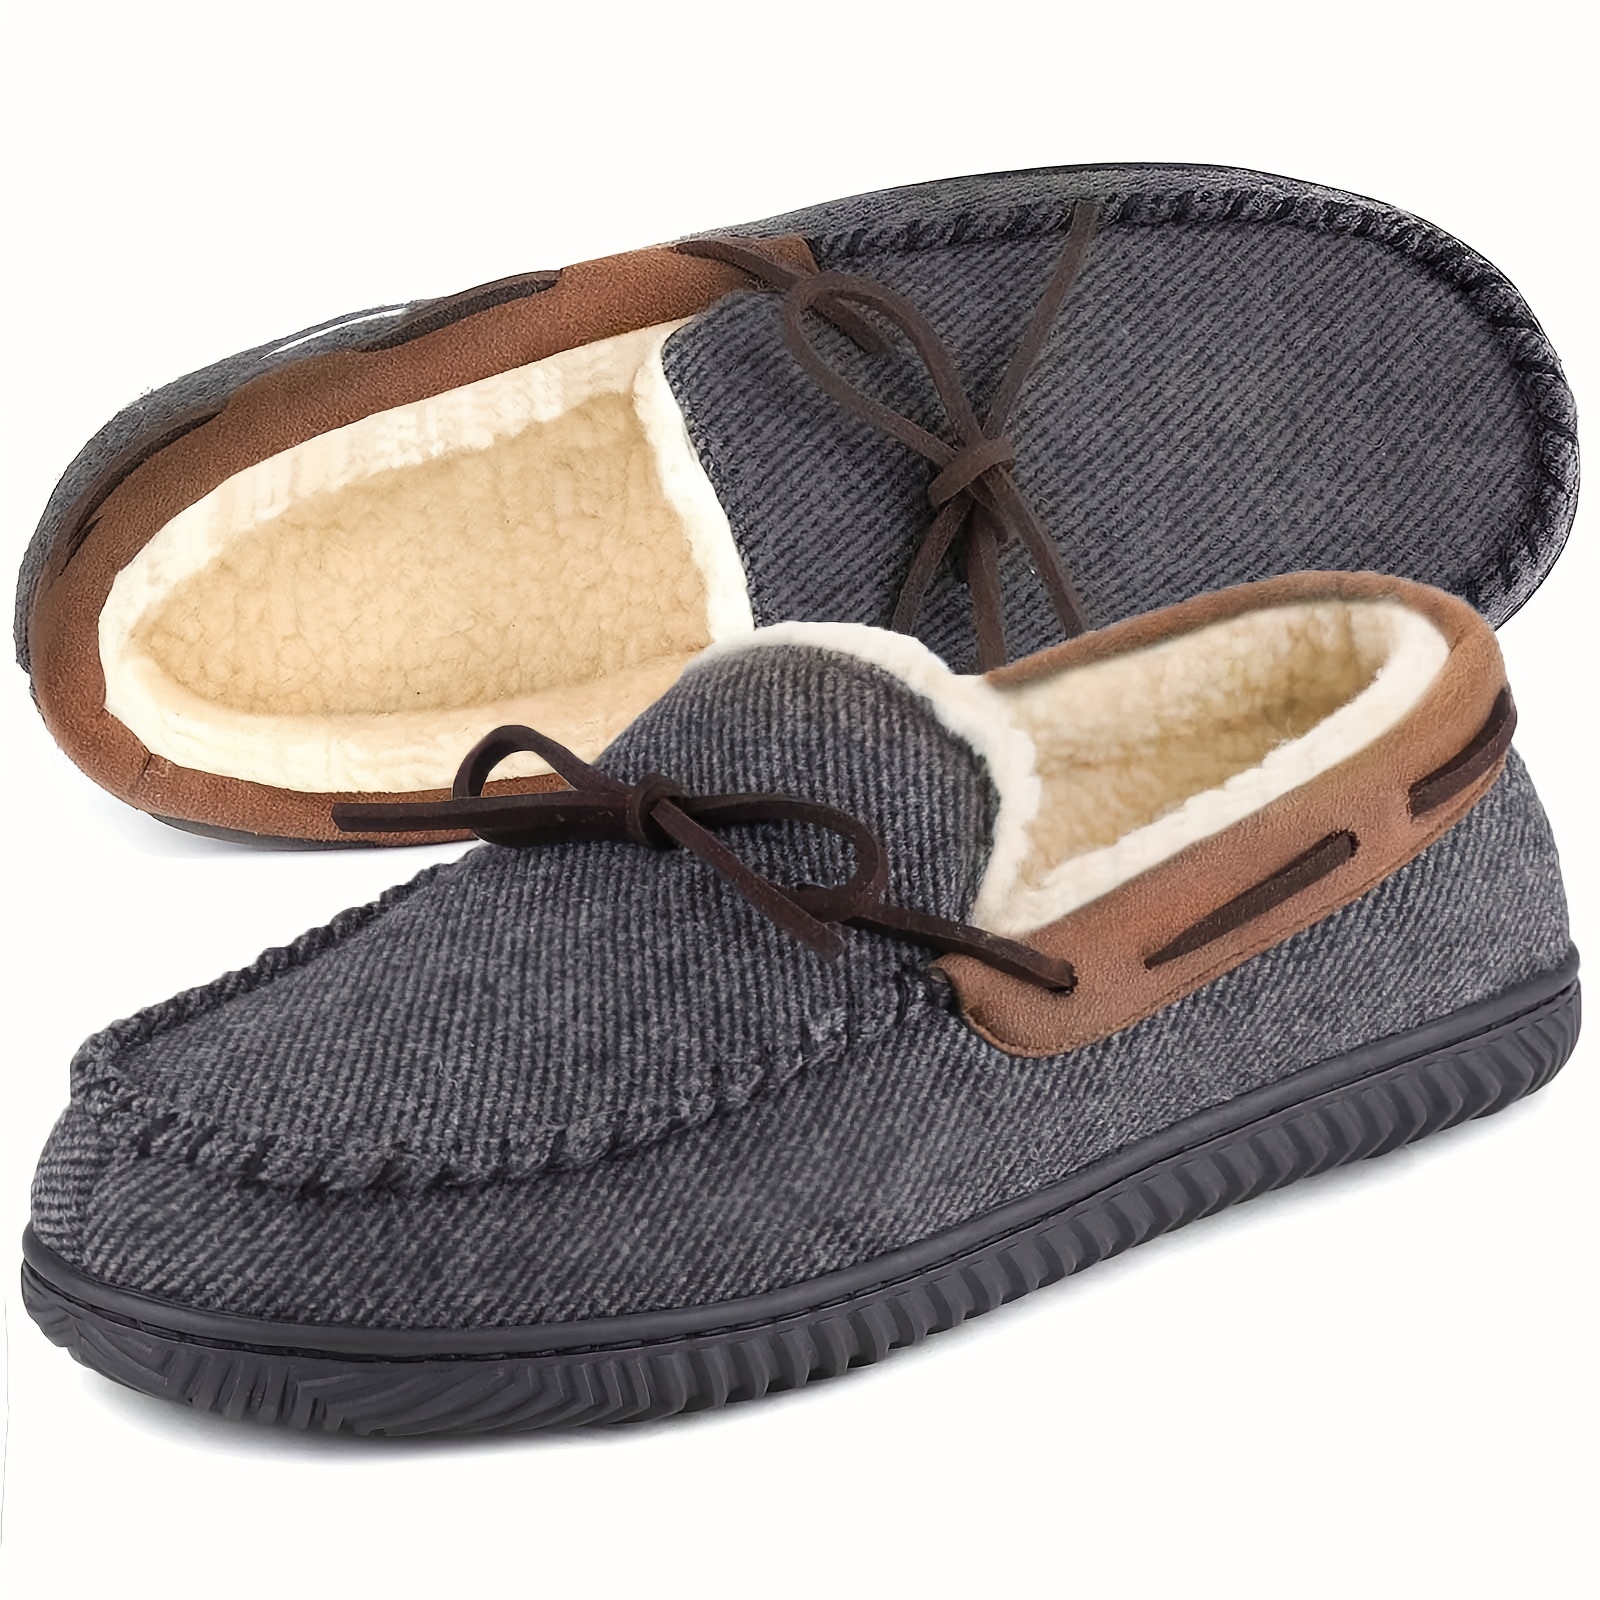 Mens Suede Moccasin Slippers | Buffalo Slippers - G.H.BASS – G.H.BASS 1876